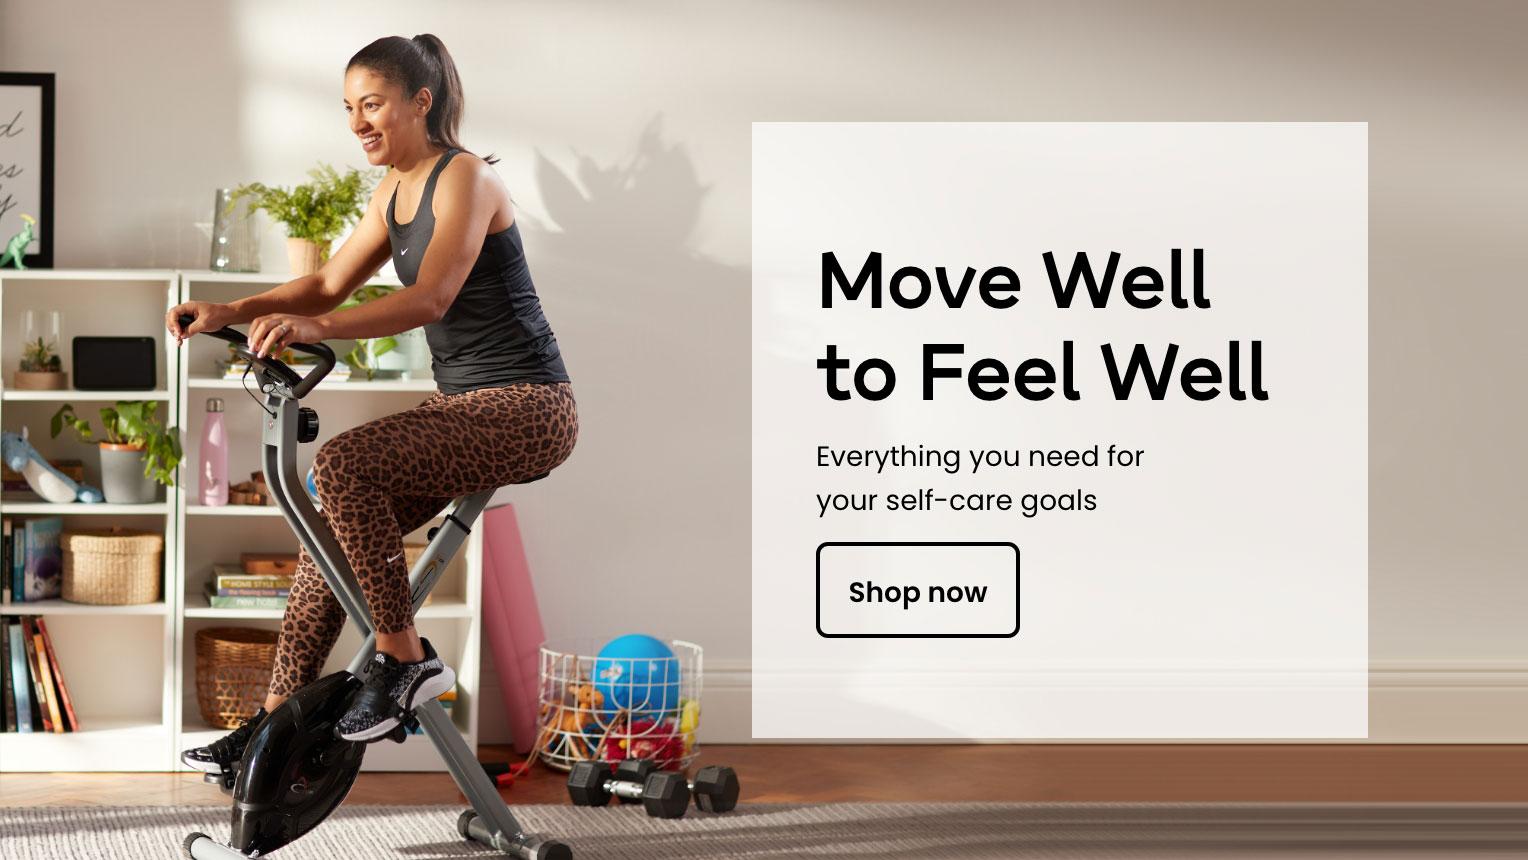 Move Well to Feel Well. Everything you need for your self-care goals. Shop now.